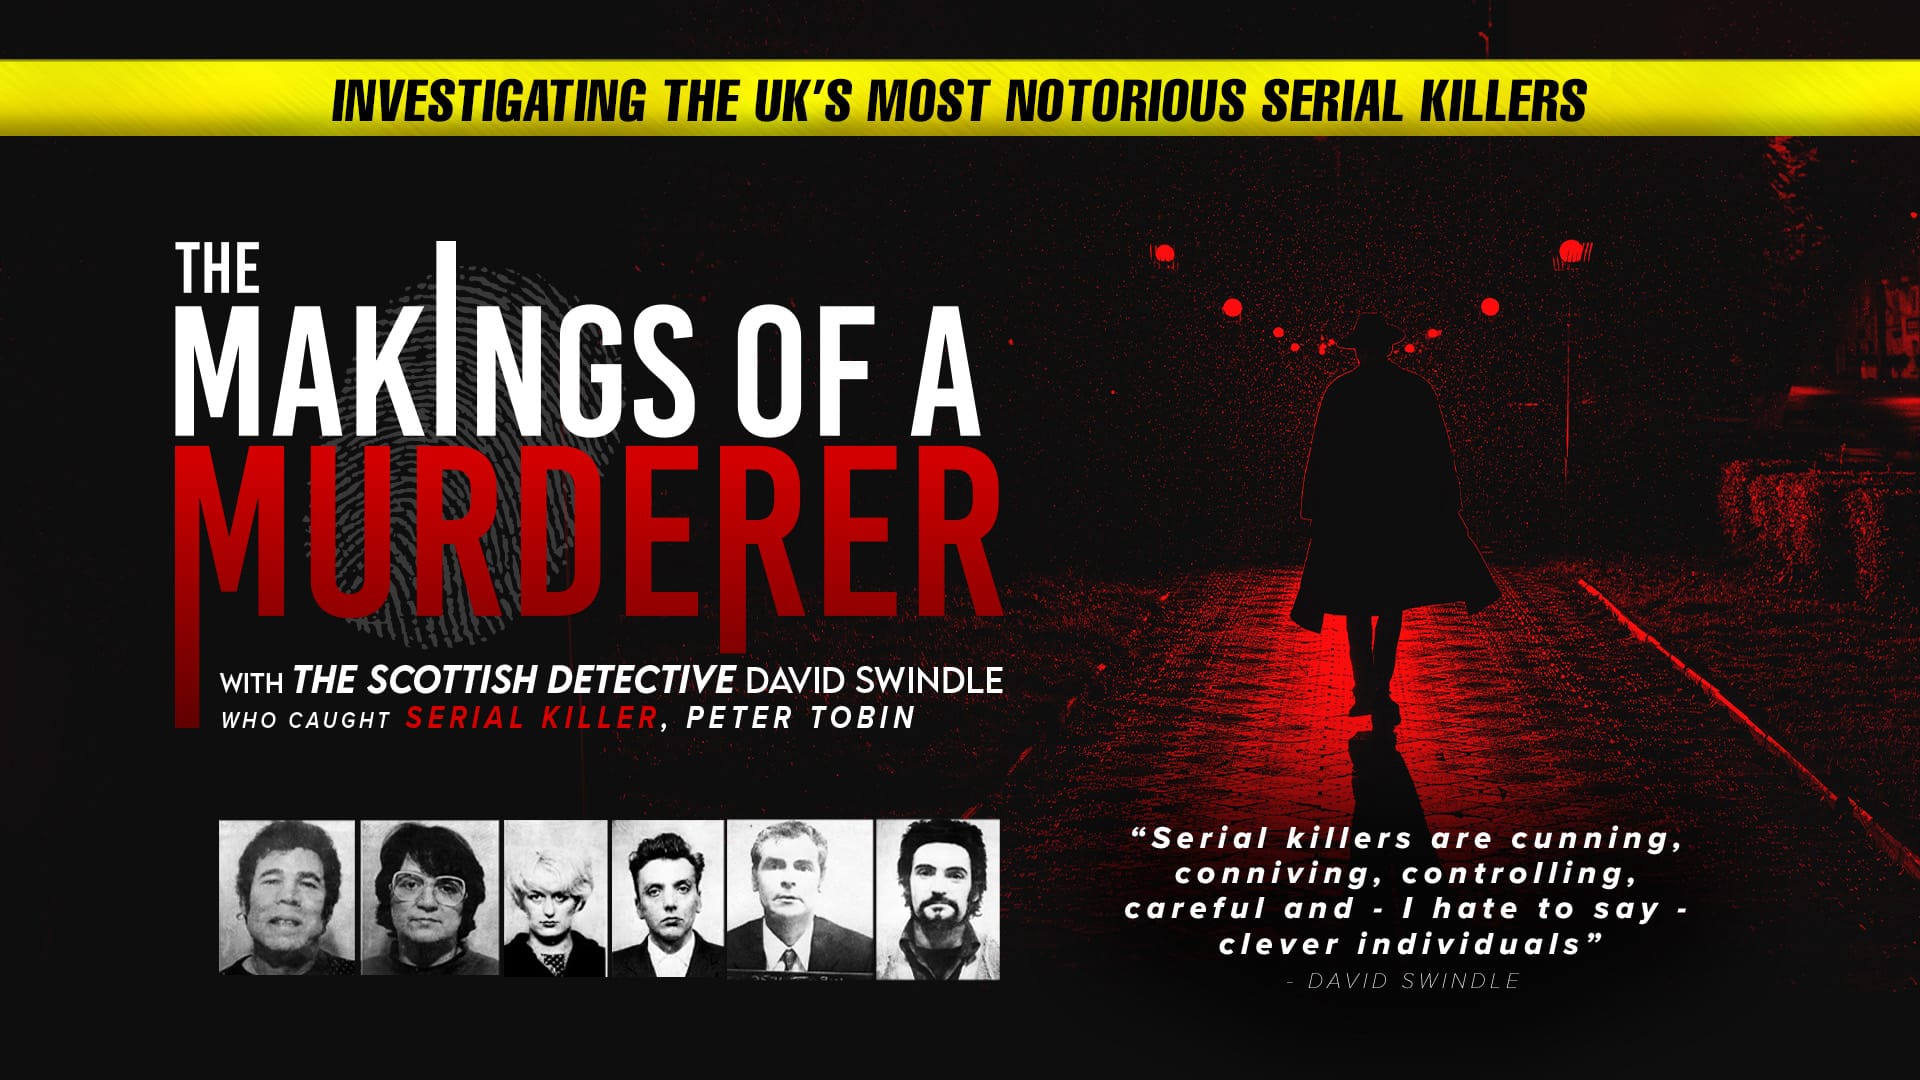 The Makings of a Murder artwork – Background: a dark street illuminated in red. A silhouetted person wearing a long coat and a trilby hat walks towards the horizon. Foreground: Text reads (top) ‘Investigating the UK’s most notorious serial killers’, (left) ‘The makings of a murderer. With The Scottish Detective David Swindle who caught Serial Killer Peter Tobin’, (bottom right) ‘Serial killers are cunning, conniving, controlling, careful and – hate to say it – clever individuals. David Swingle’. On the bottom left-hand side of the image, a collage of headshots of famous British serial killers.